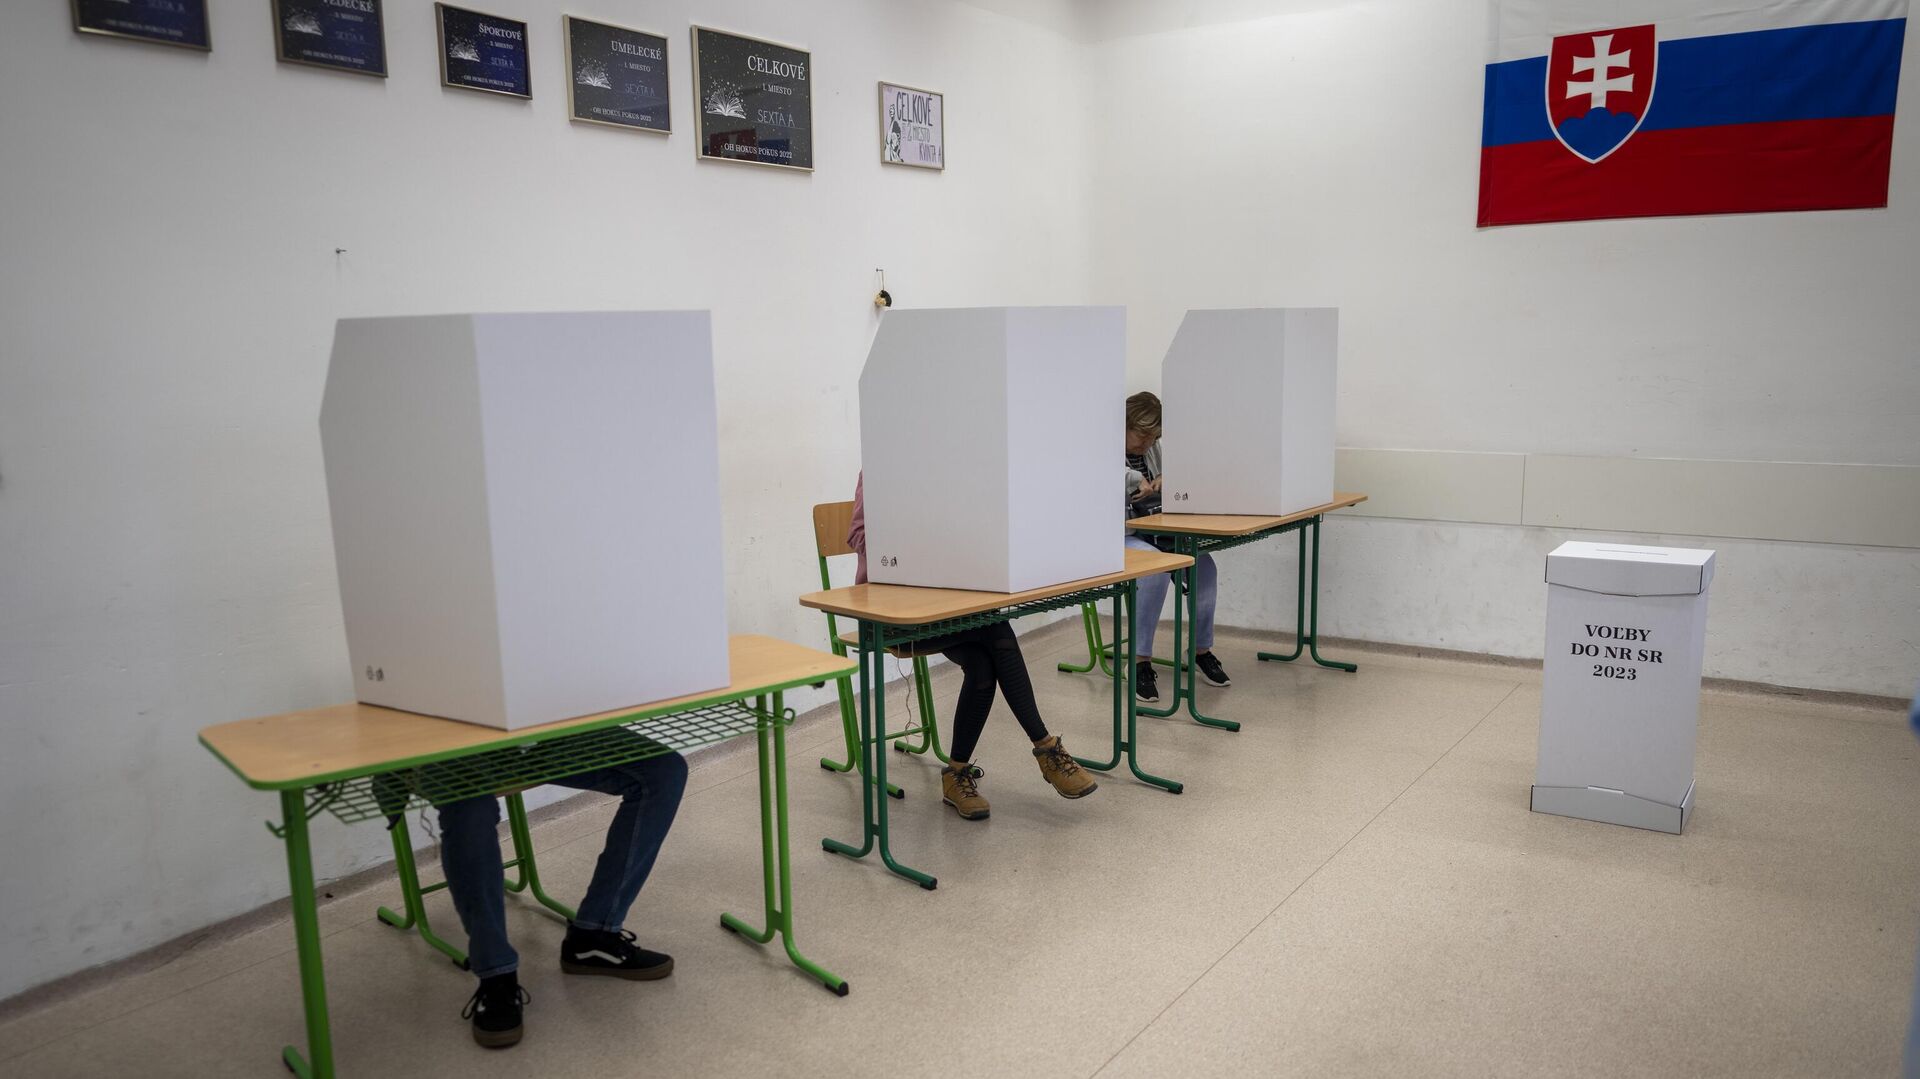 Opposition party SMER wins parliamentary elections in Slovakia